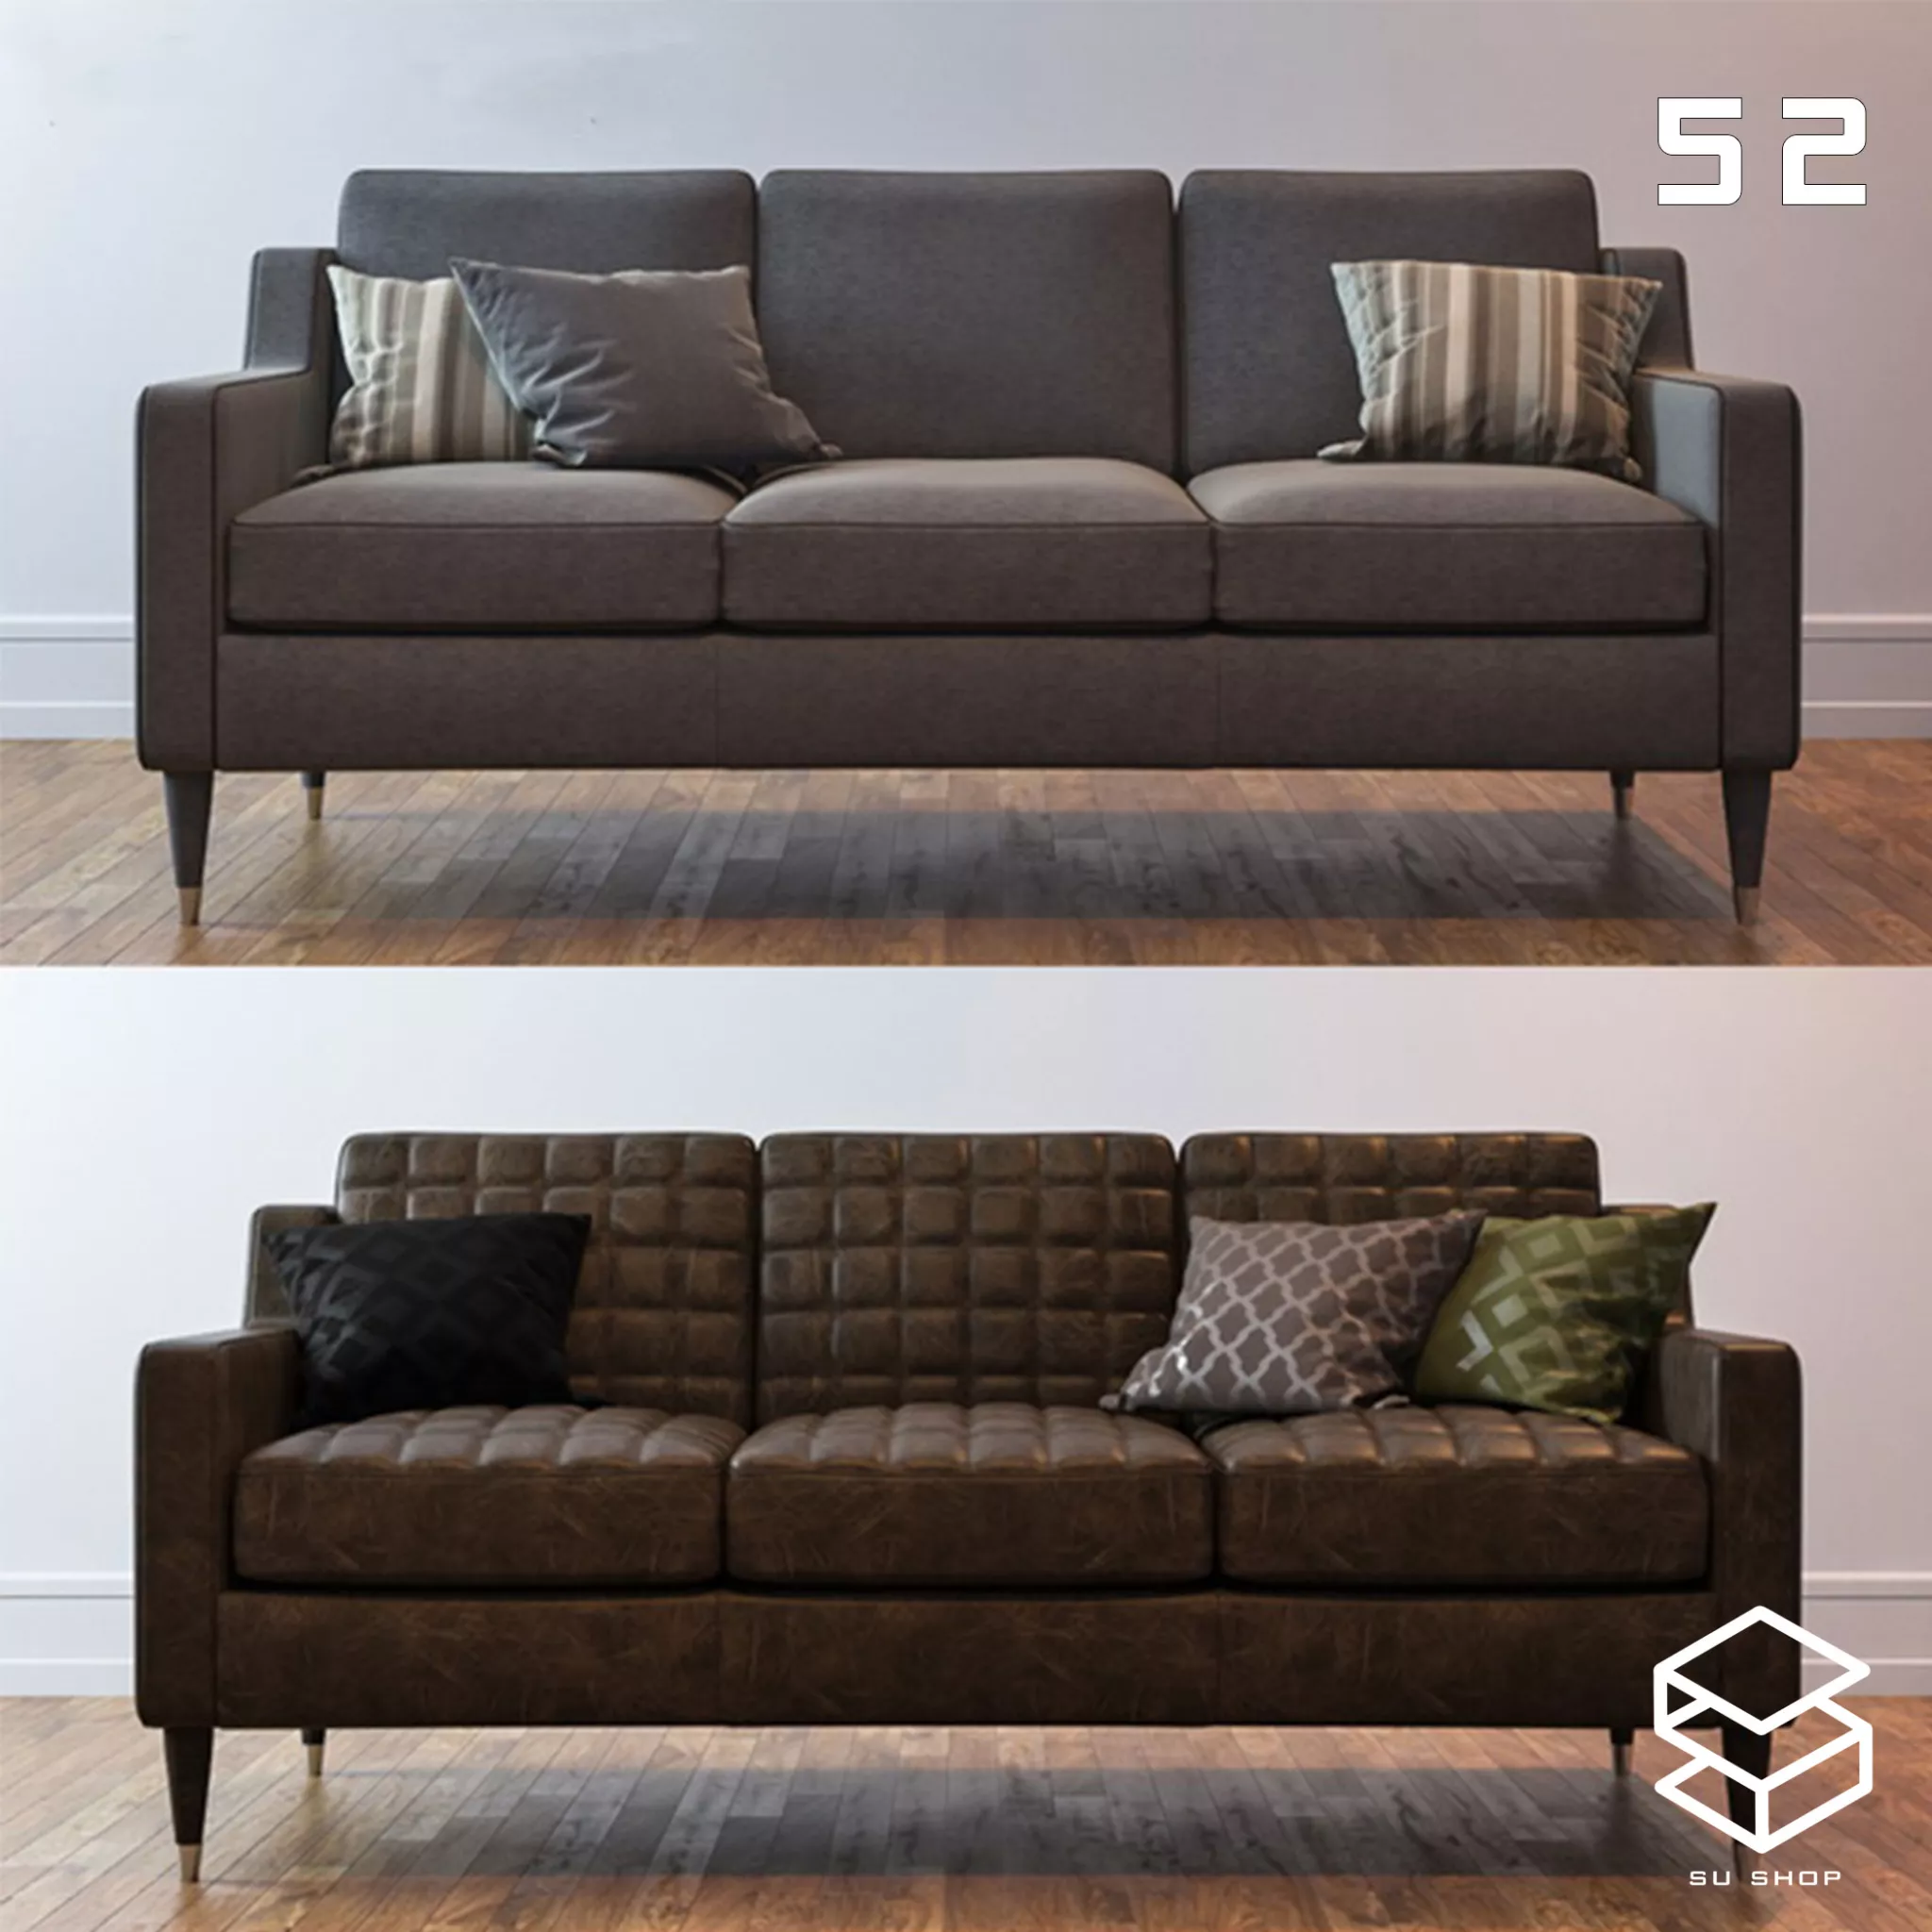 MODERN SOFA - SKETCHUP 3D MODEL - VRAY OR ENSCAPE - ID13677